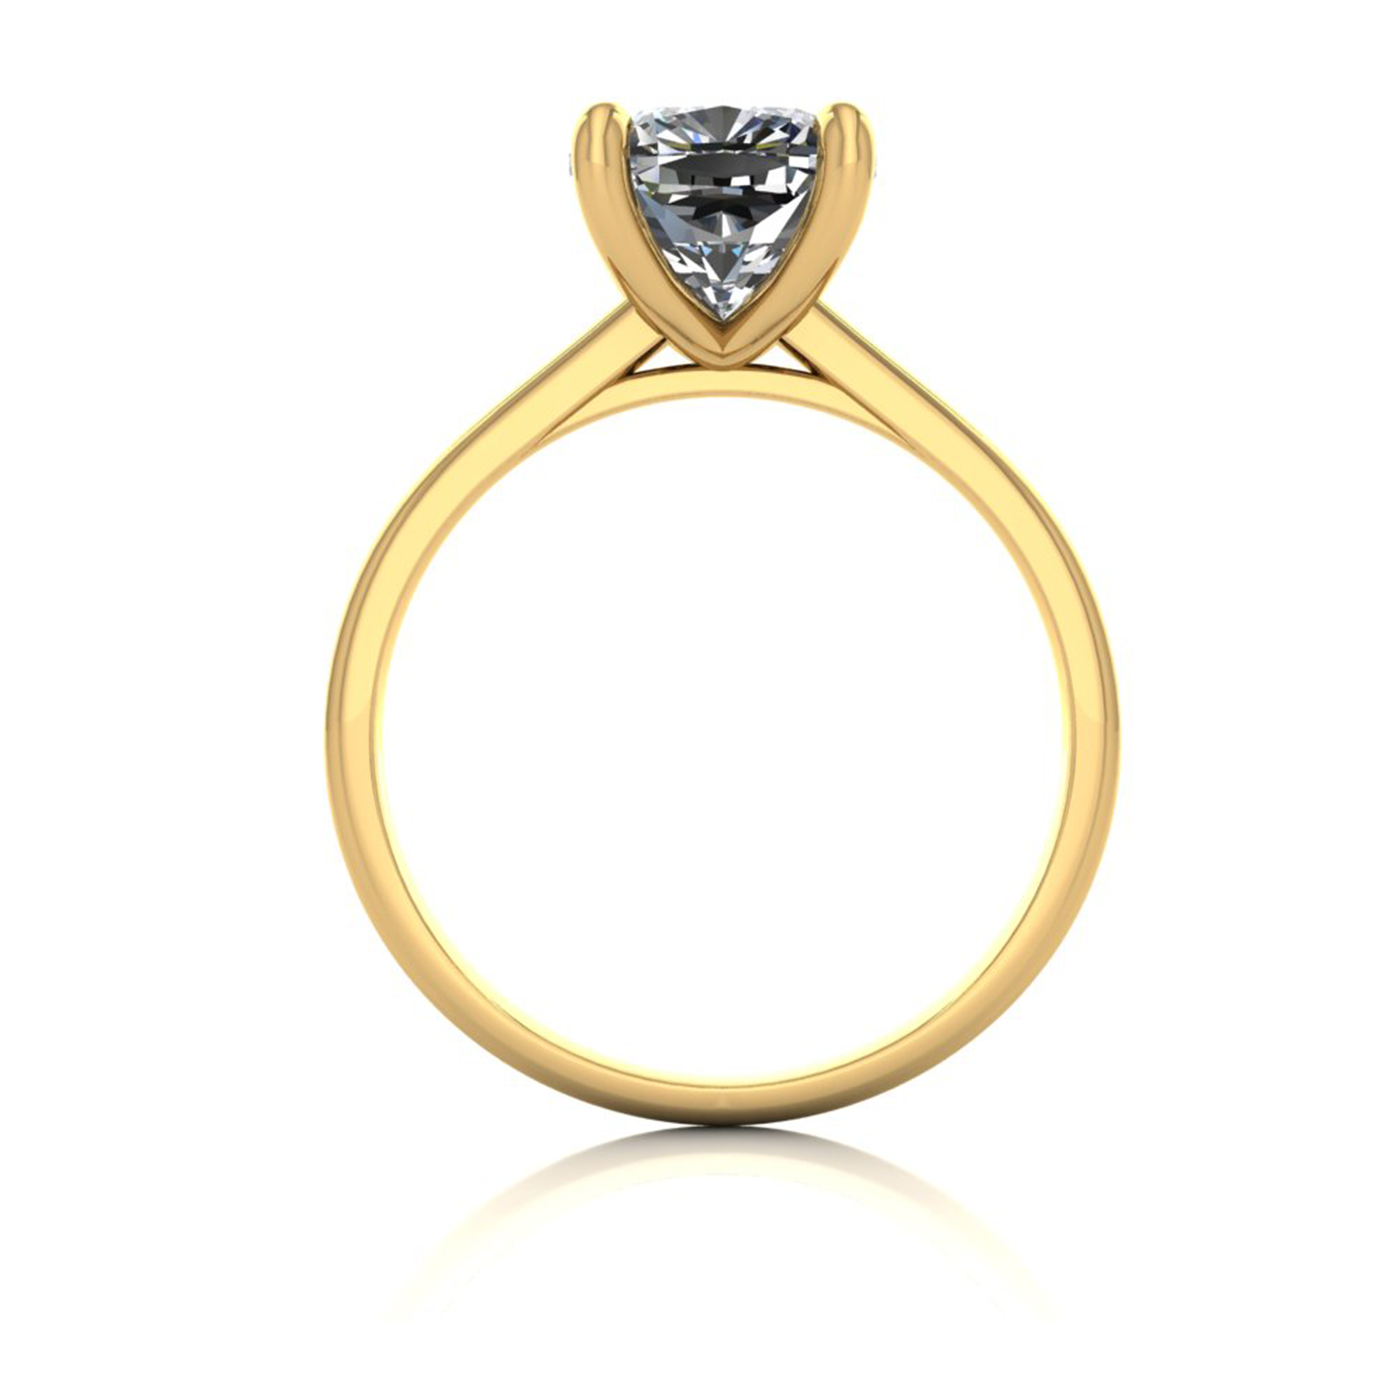 18k yellow gold 2.5ct 4 prongs solitaire cushion cut diamond engagement ring with whisper thin band